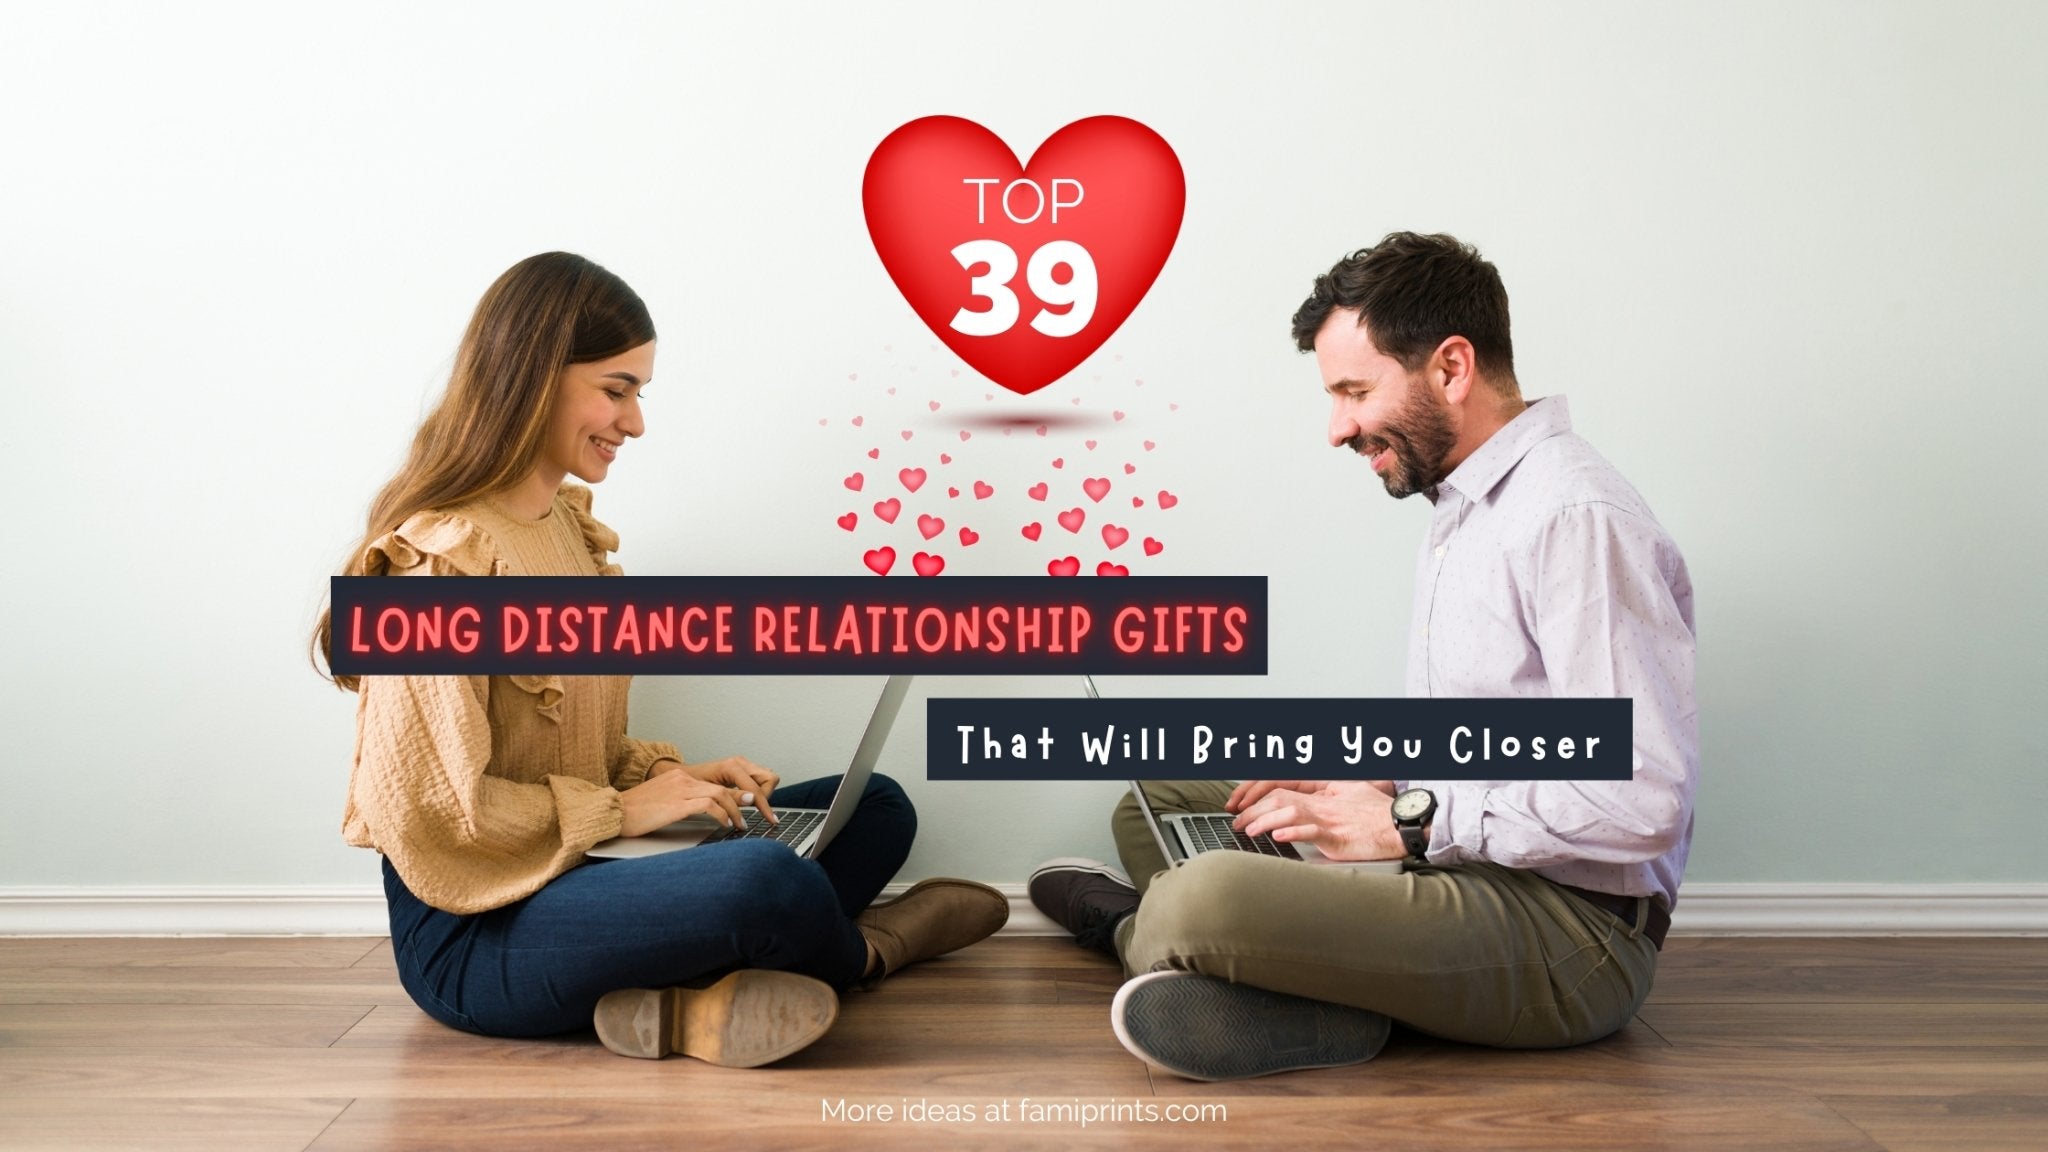 Personalized Long Distance relationship gift ideas for Family and frie —  Glacelis